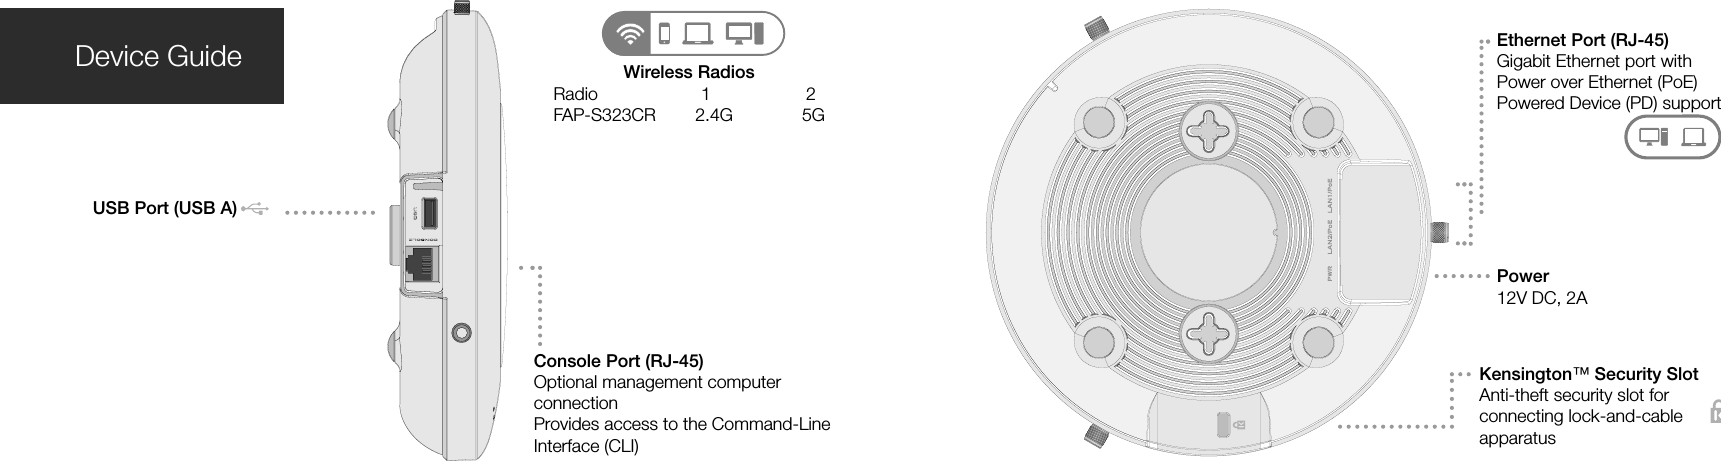 Device Guide Wireless RadiosRadio   1   2FAP-S323CR         2.4G              5GKensington™ Security SlotAnti-theft security slot for connecting lock-and-cable apparatusEthernet Port (RJ-45) Gigabit Ethernet port with Power over Ethernet (PoE) Powered Device (PD) supportPower12V DC, 2AConsole Port (RJ-45)Optional management computer connection Provides access to the Command-Line Interface (CLI)USB Port (USB A)    